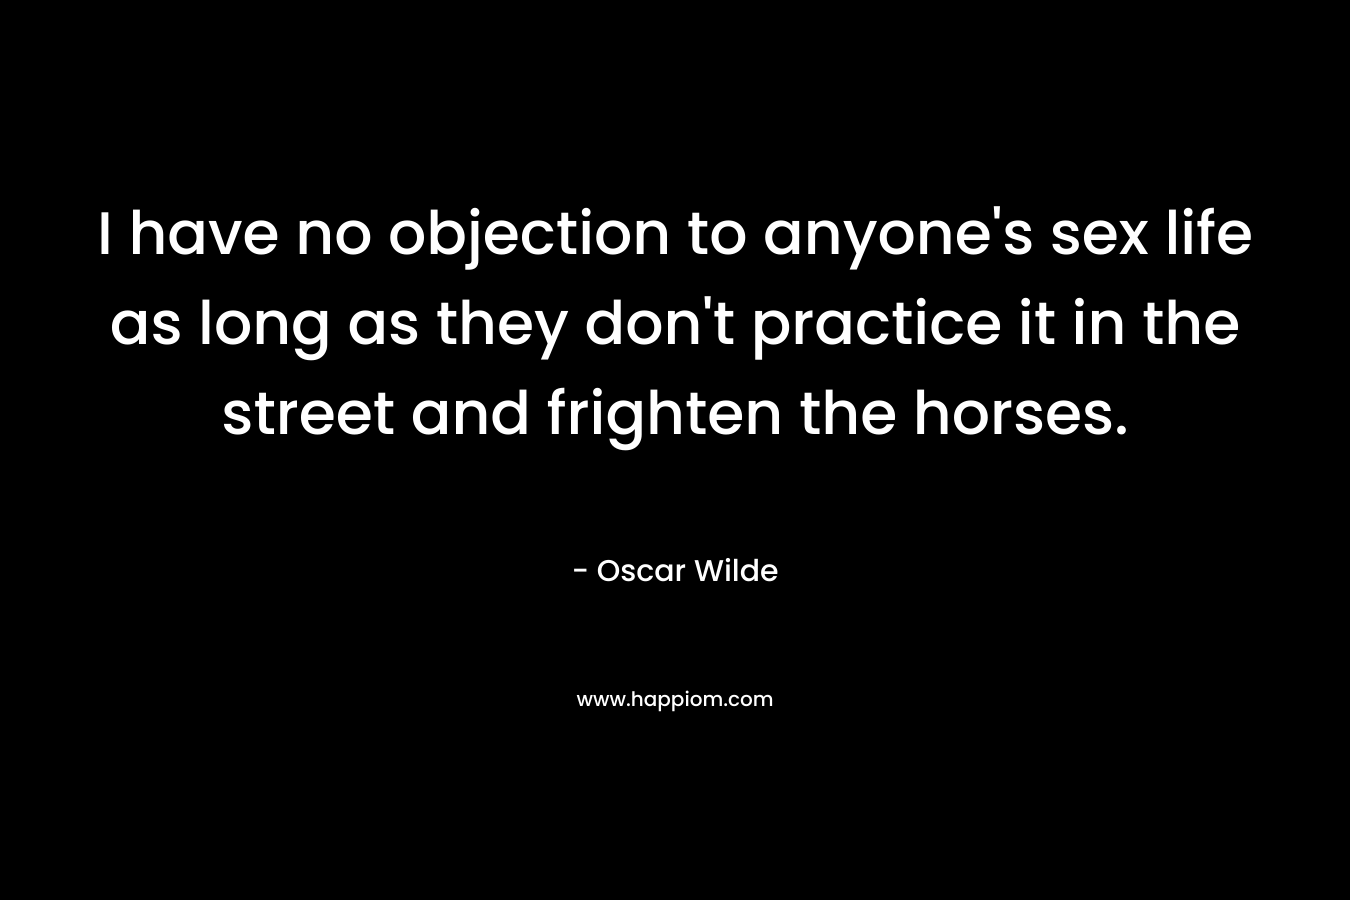 I have no objection to anyone's sex life as long as they don't practice it in the street and frighten the horses.